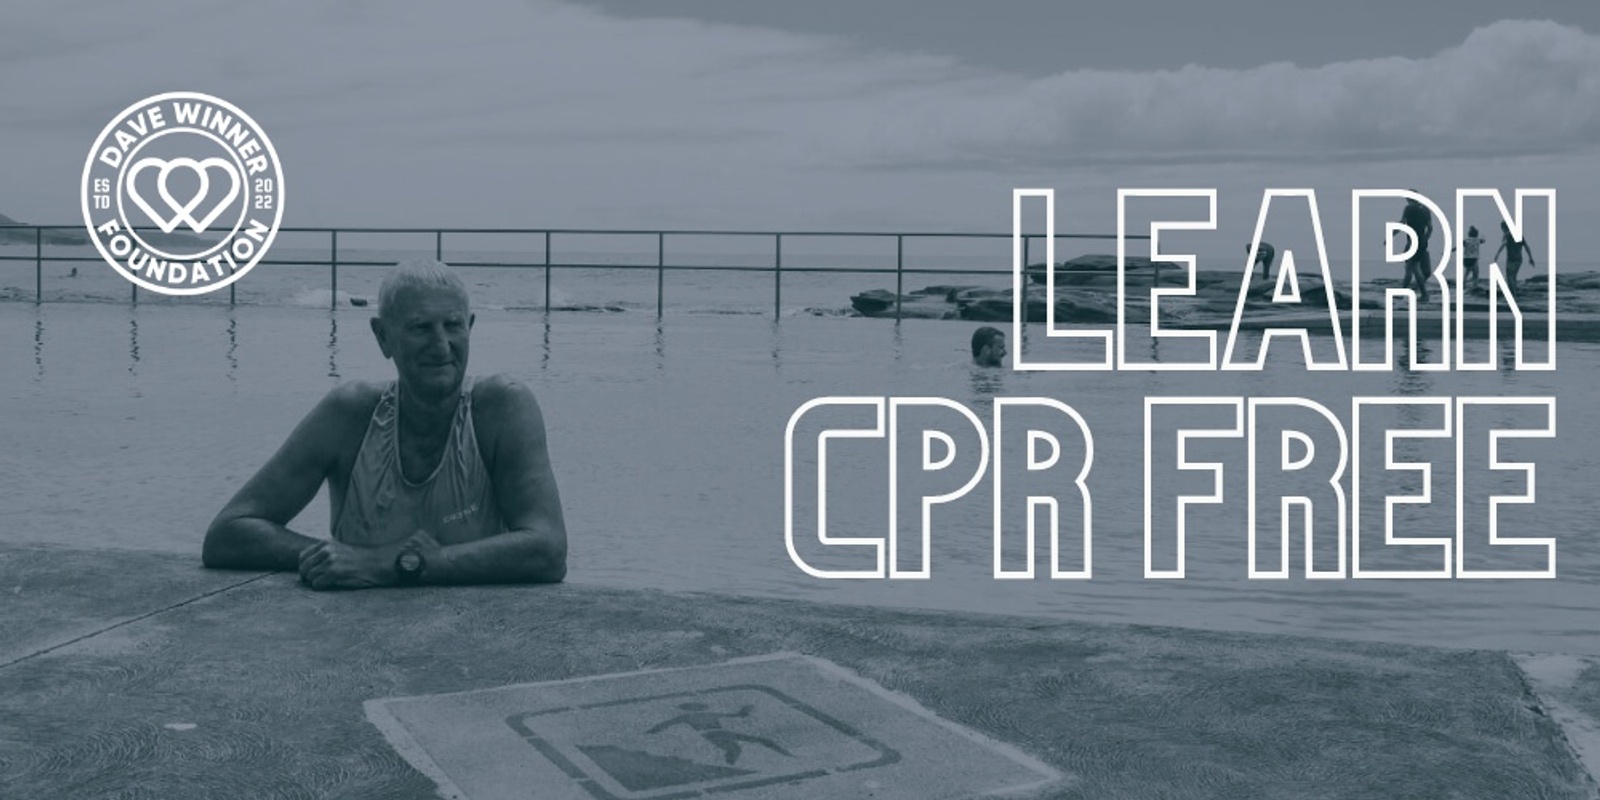 Banner image for Winner Foundation: Free CPR Training #17